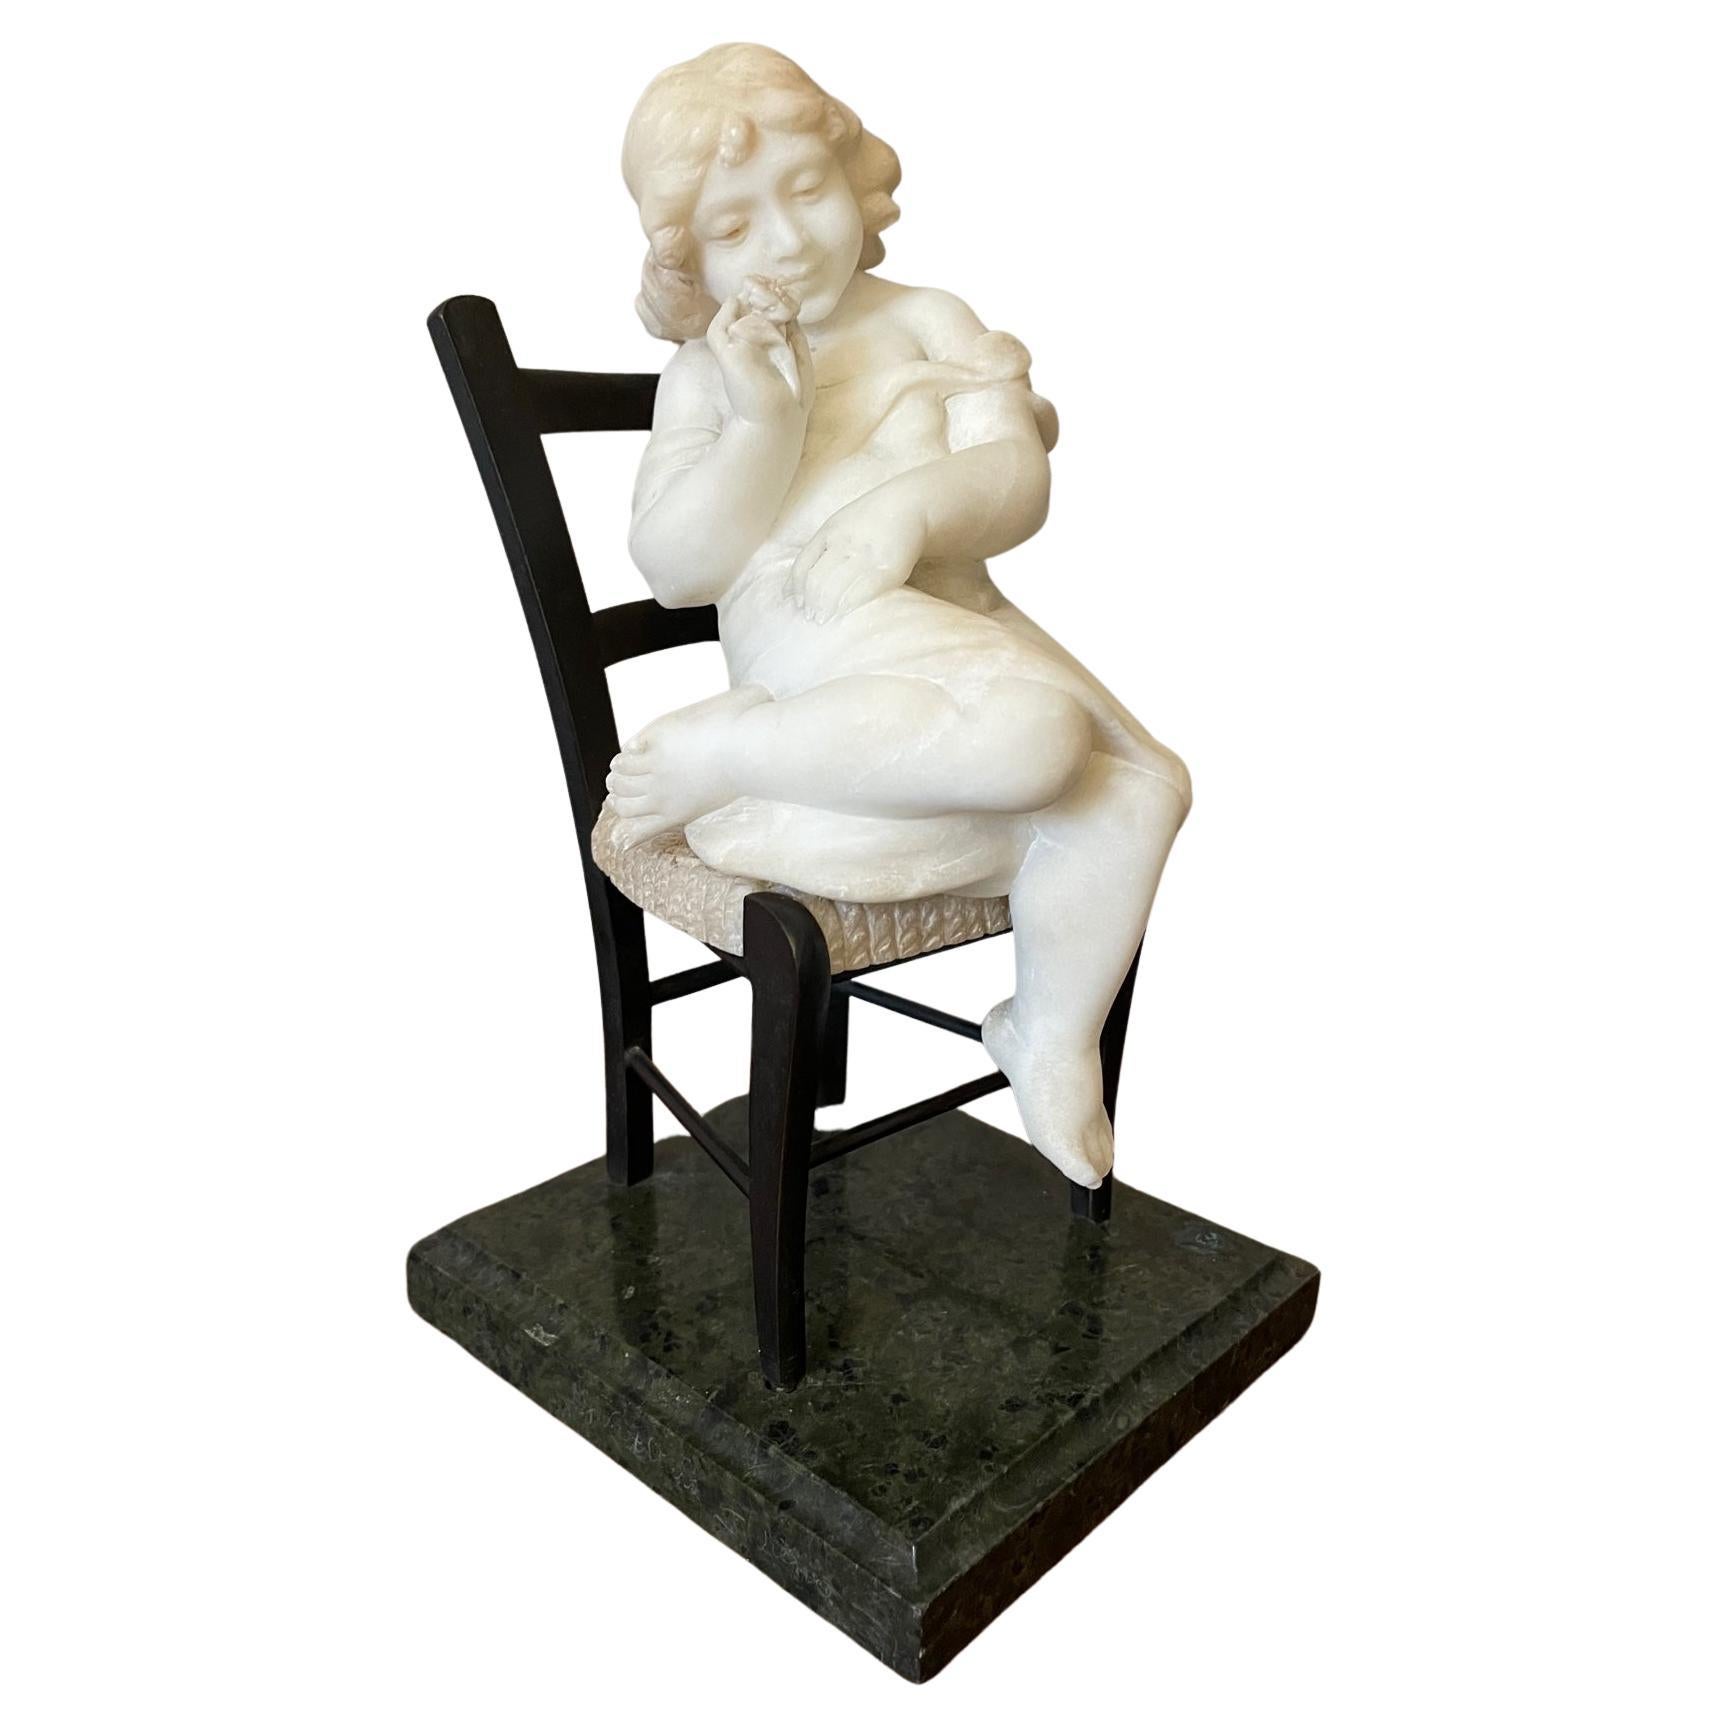 Early 20th Century French Marble and Bronze Sculpture Girl, 1900s